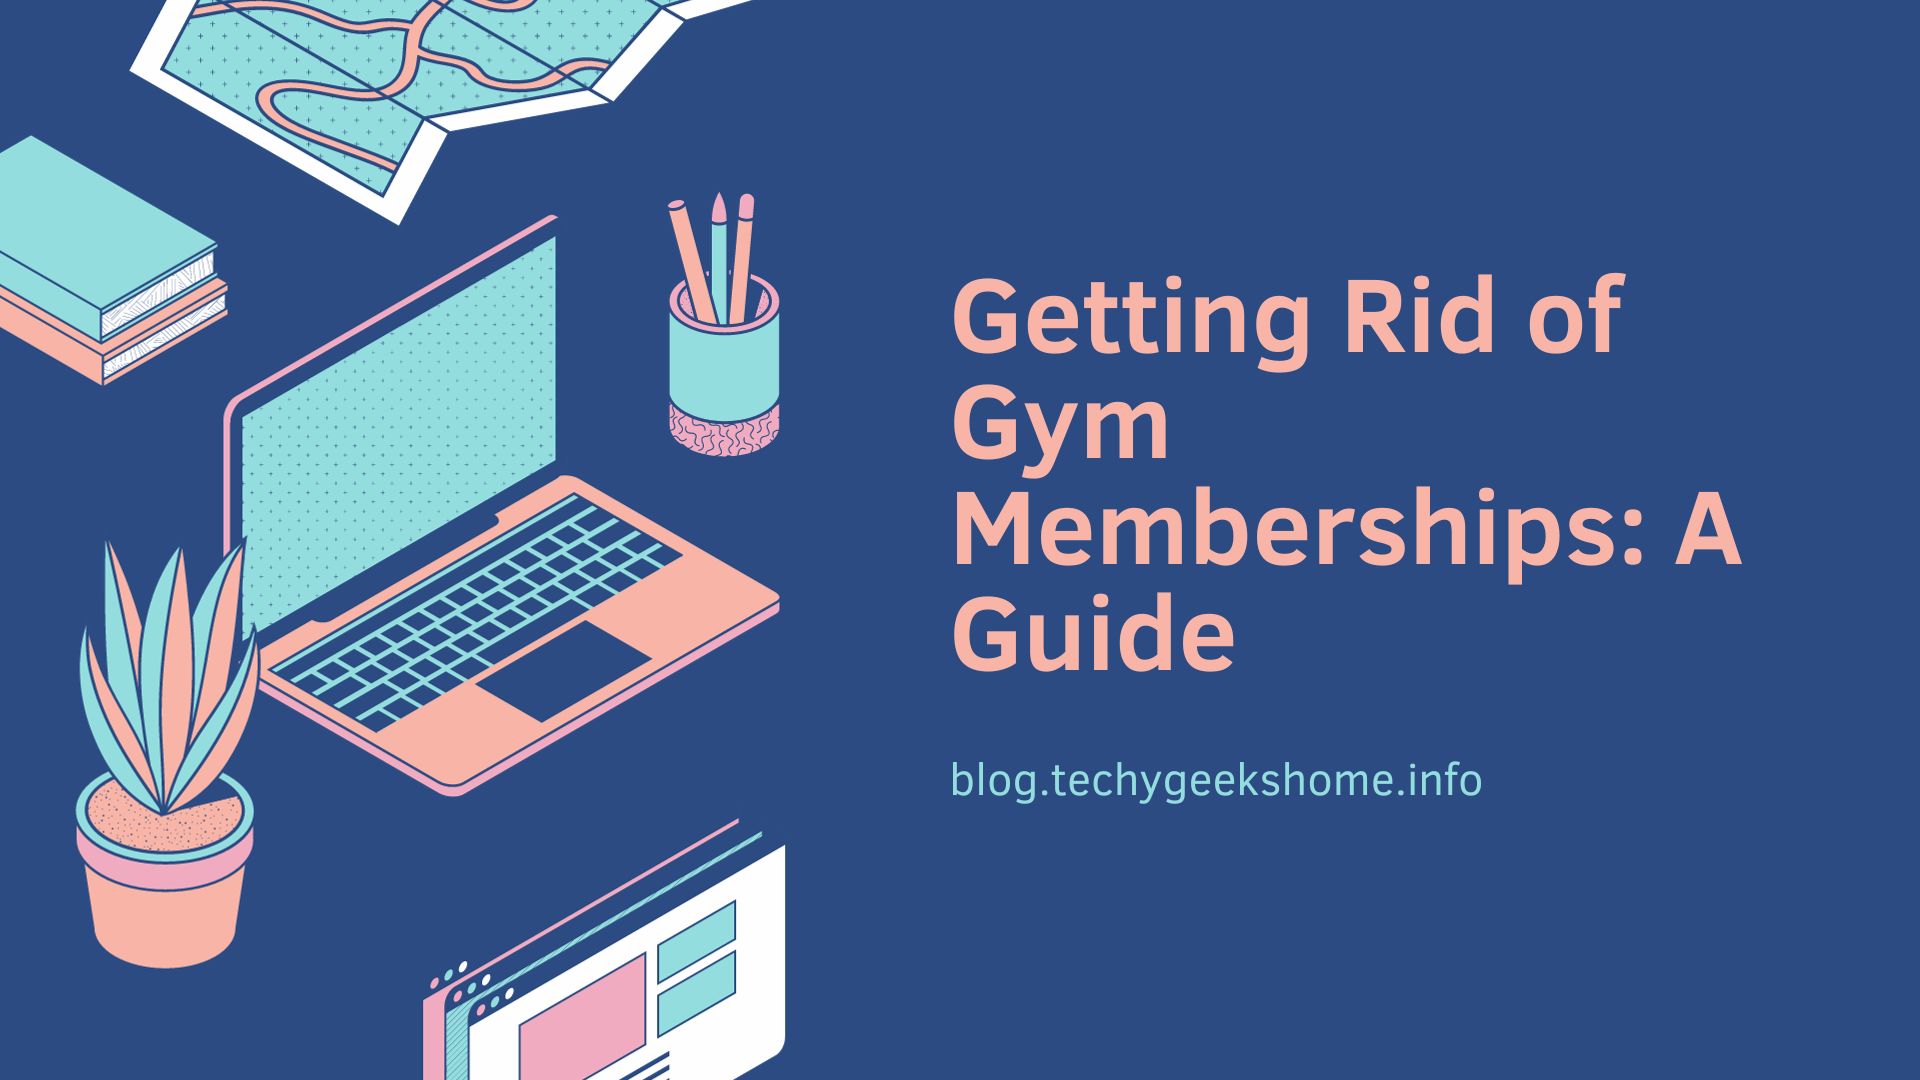 Getting Rid of Gym Memberships: A Guide